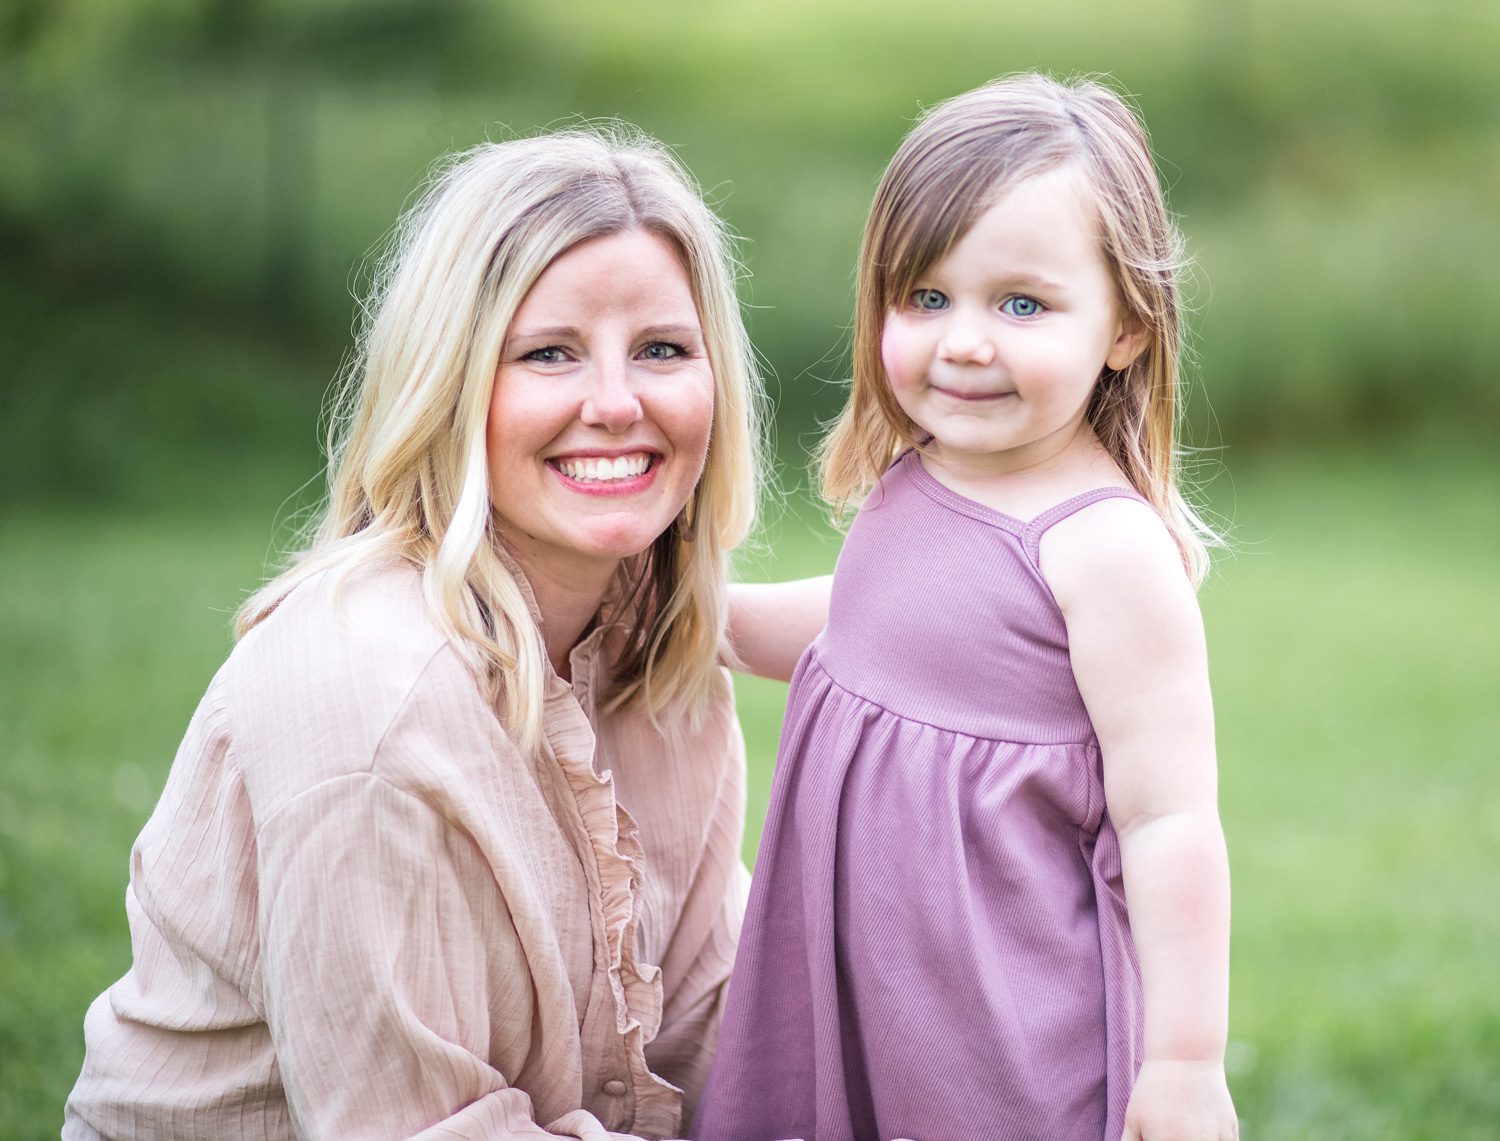 Mother and daughter outdoor portrait A&E Farm in College Grove TN